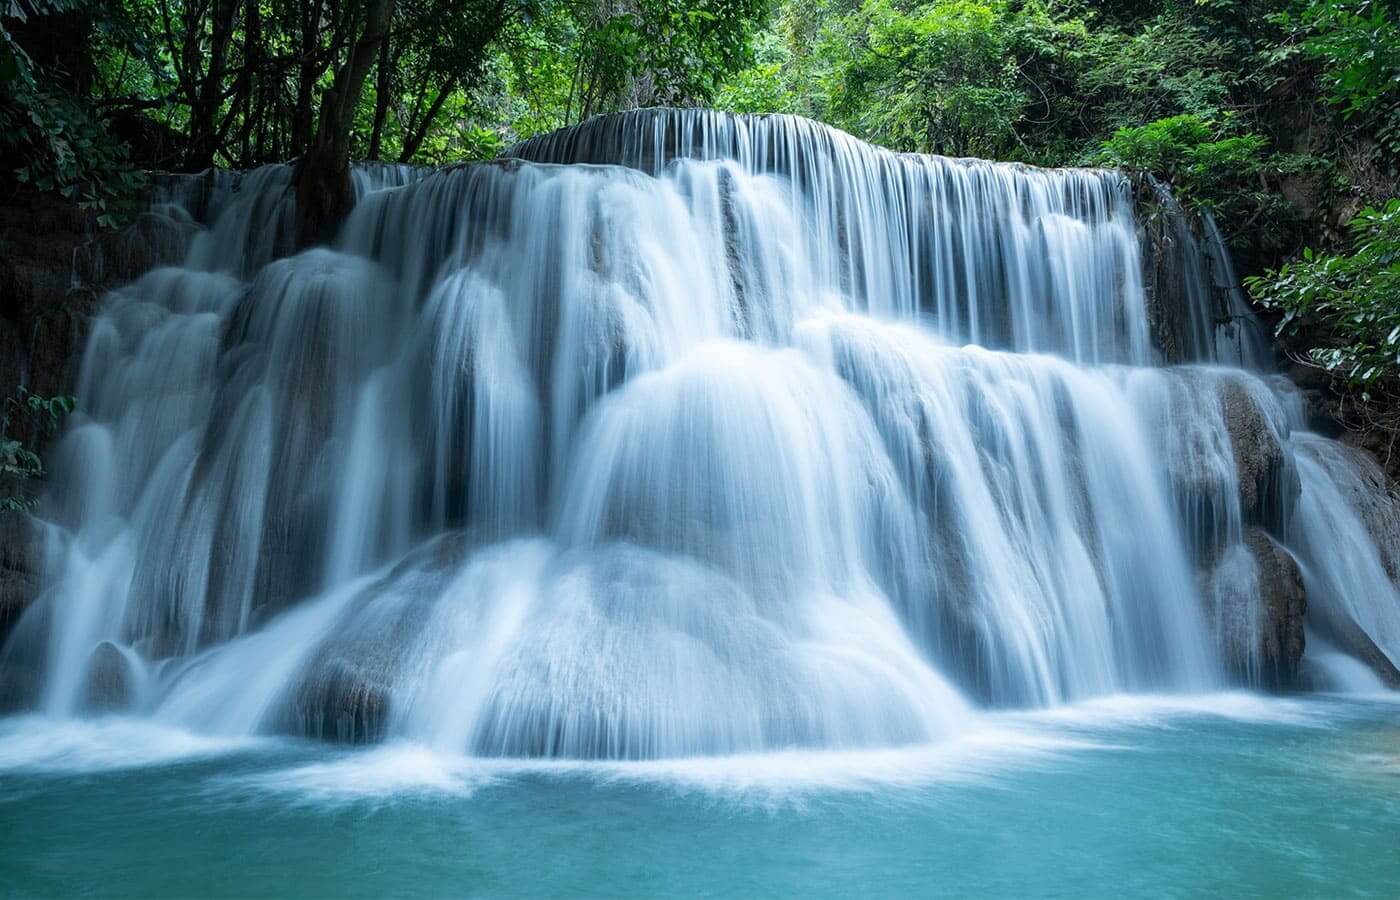 A large waterfall deep within the jungle